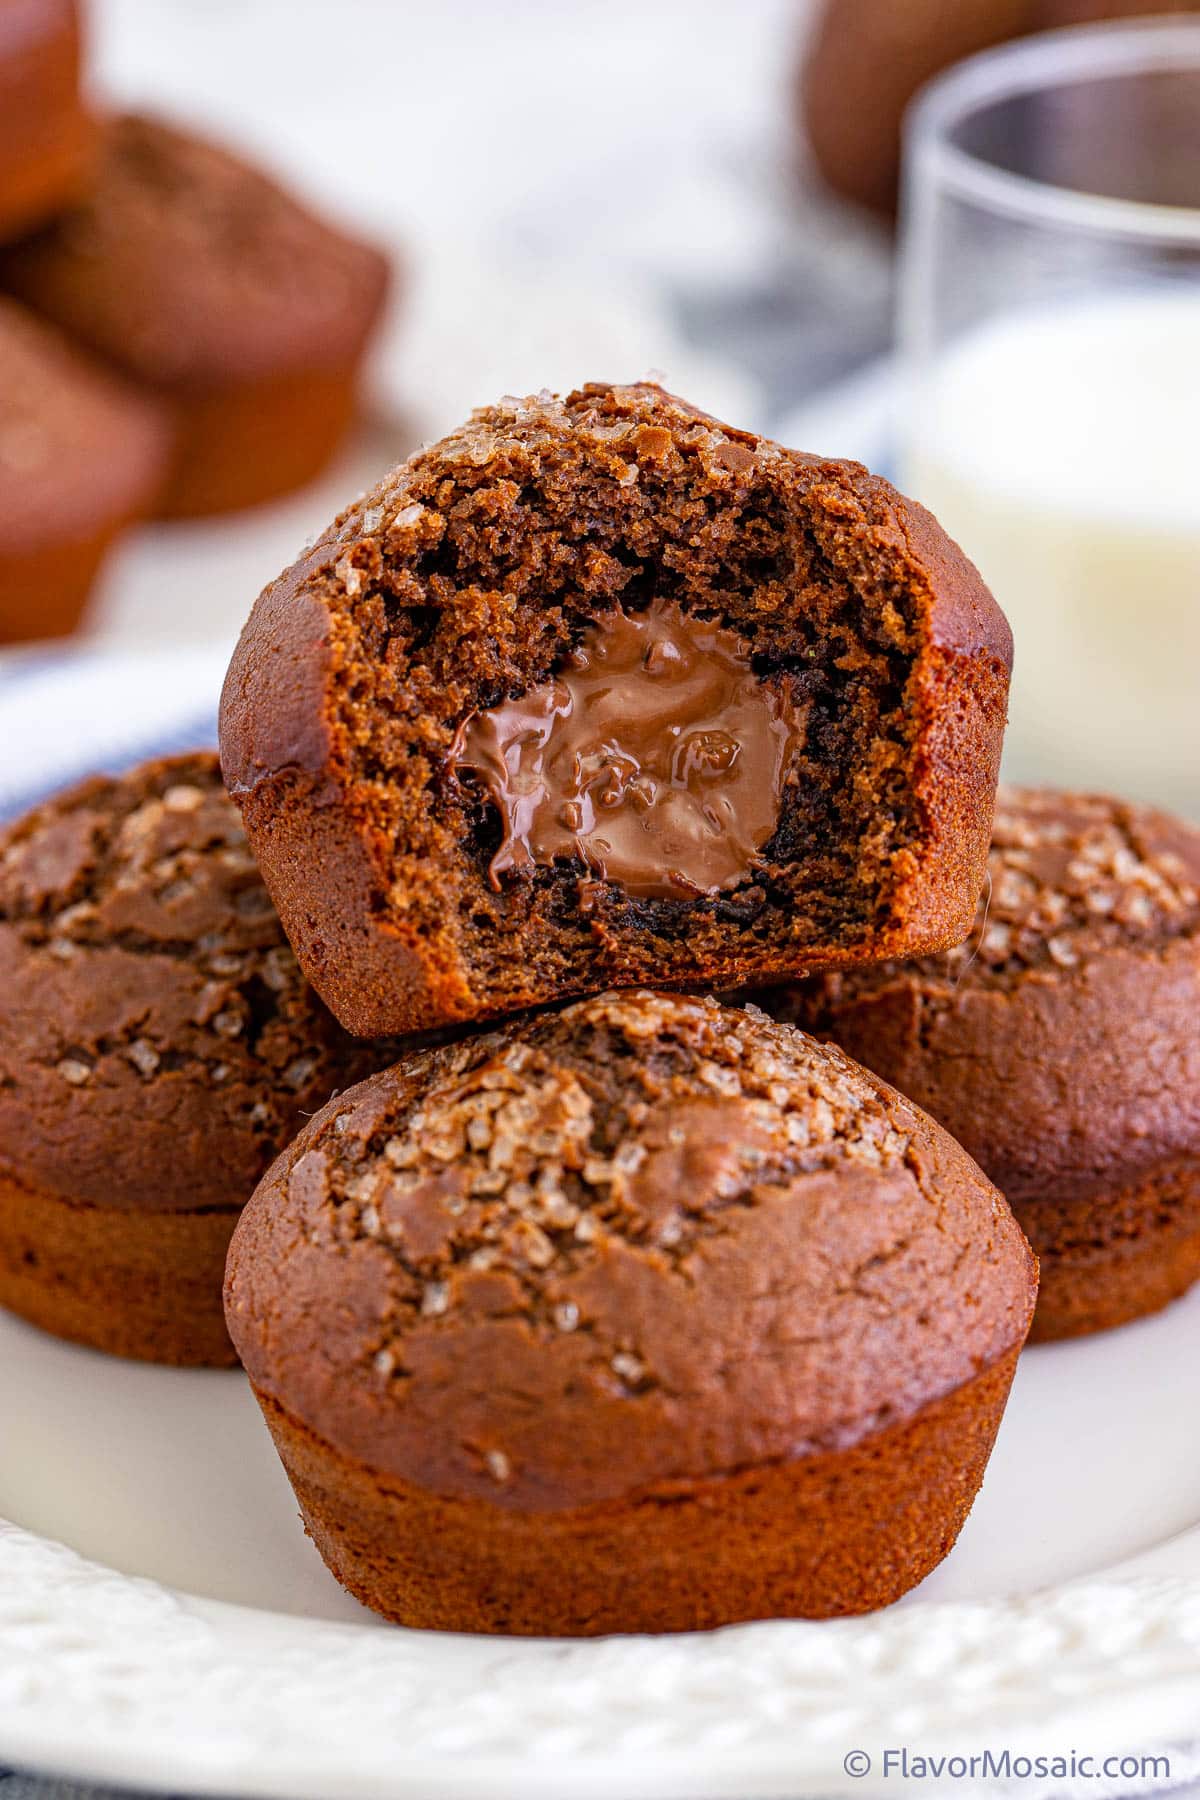 A side view close up of a Nutella Muffin with a bite taken out of it showing the creamy Nutella filling, sitting on top of 3 other Nutella Muffins on a bite plate. In the background is a partial blurred view of a glass of milk and 2 other plates of Nutella Muffins.